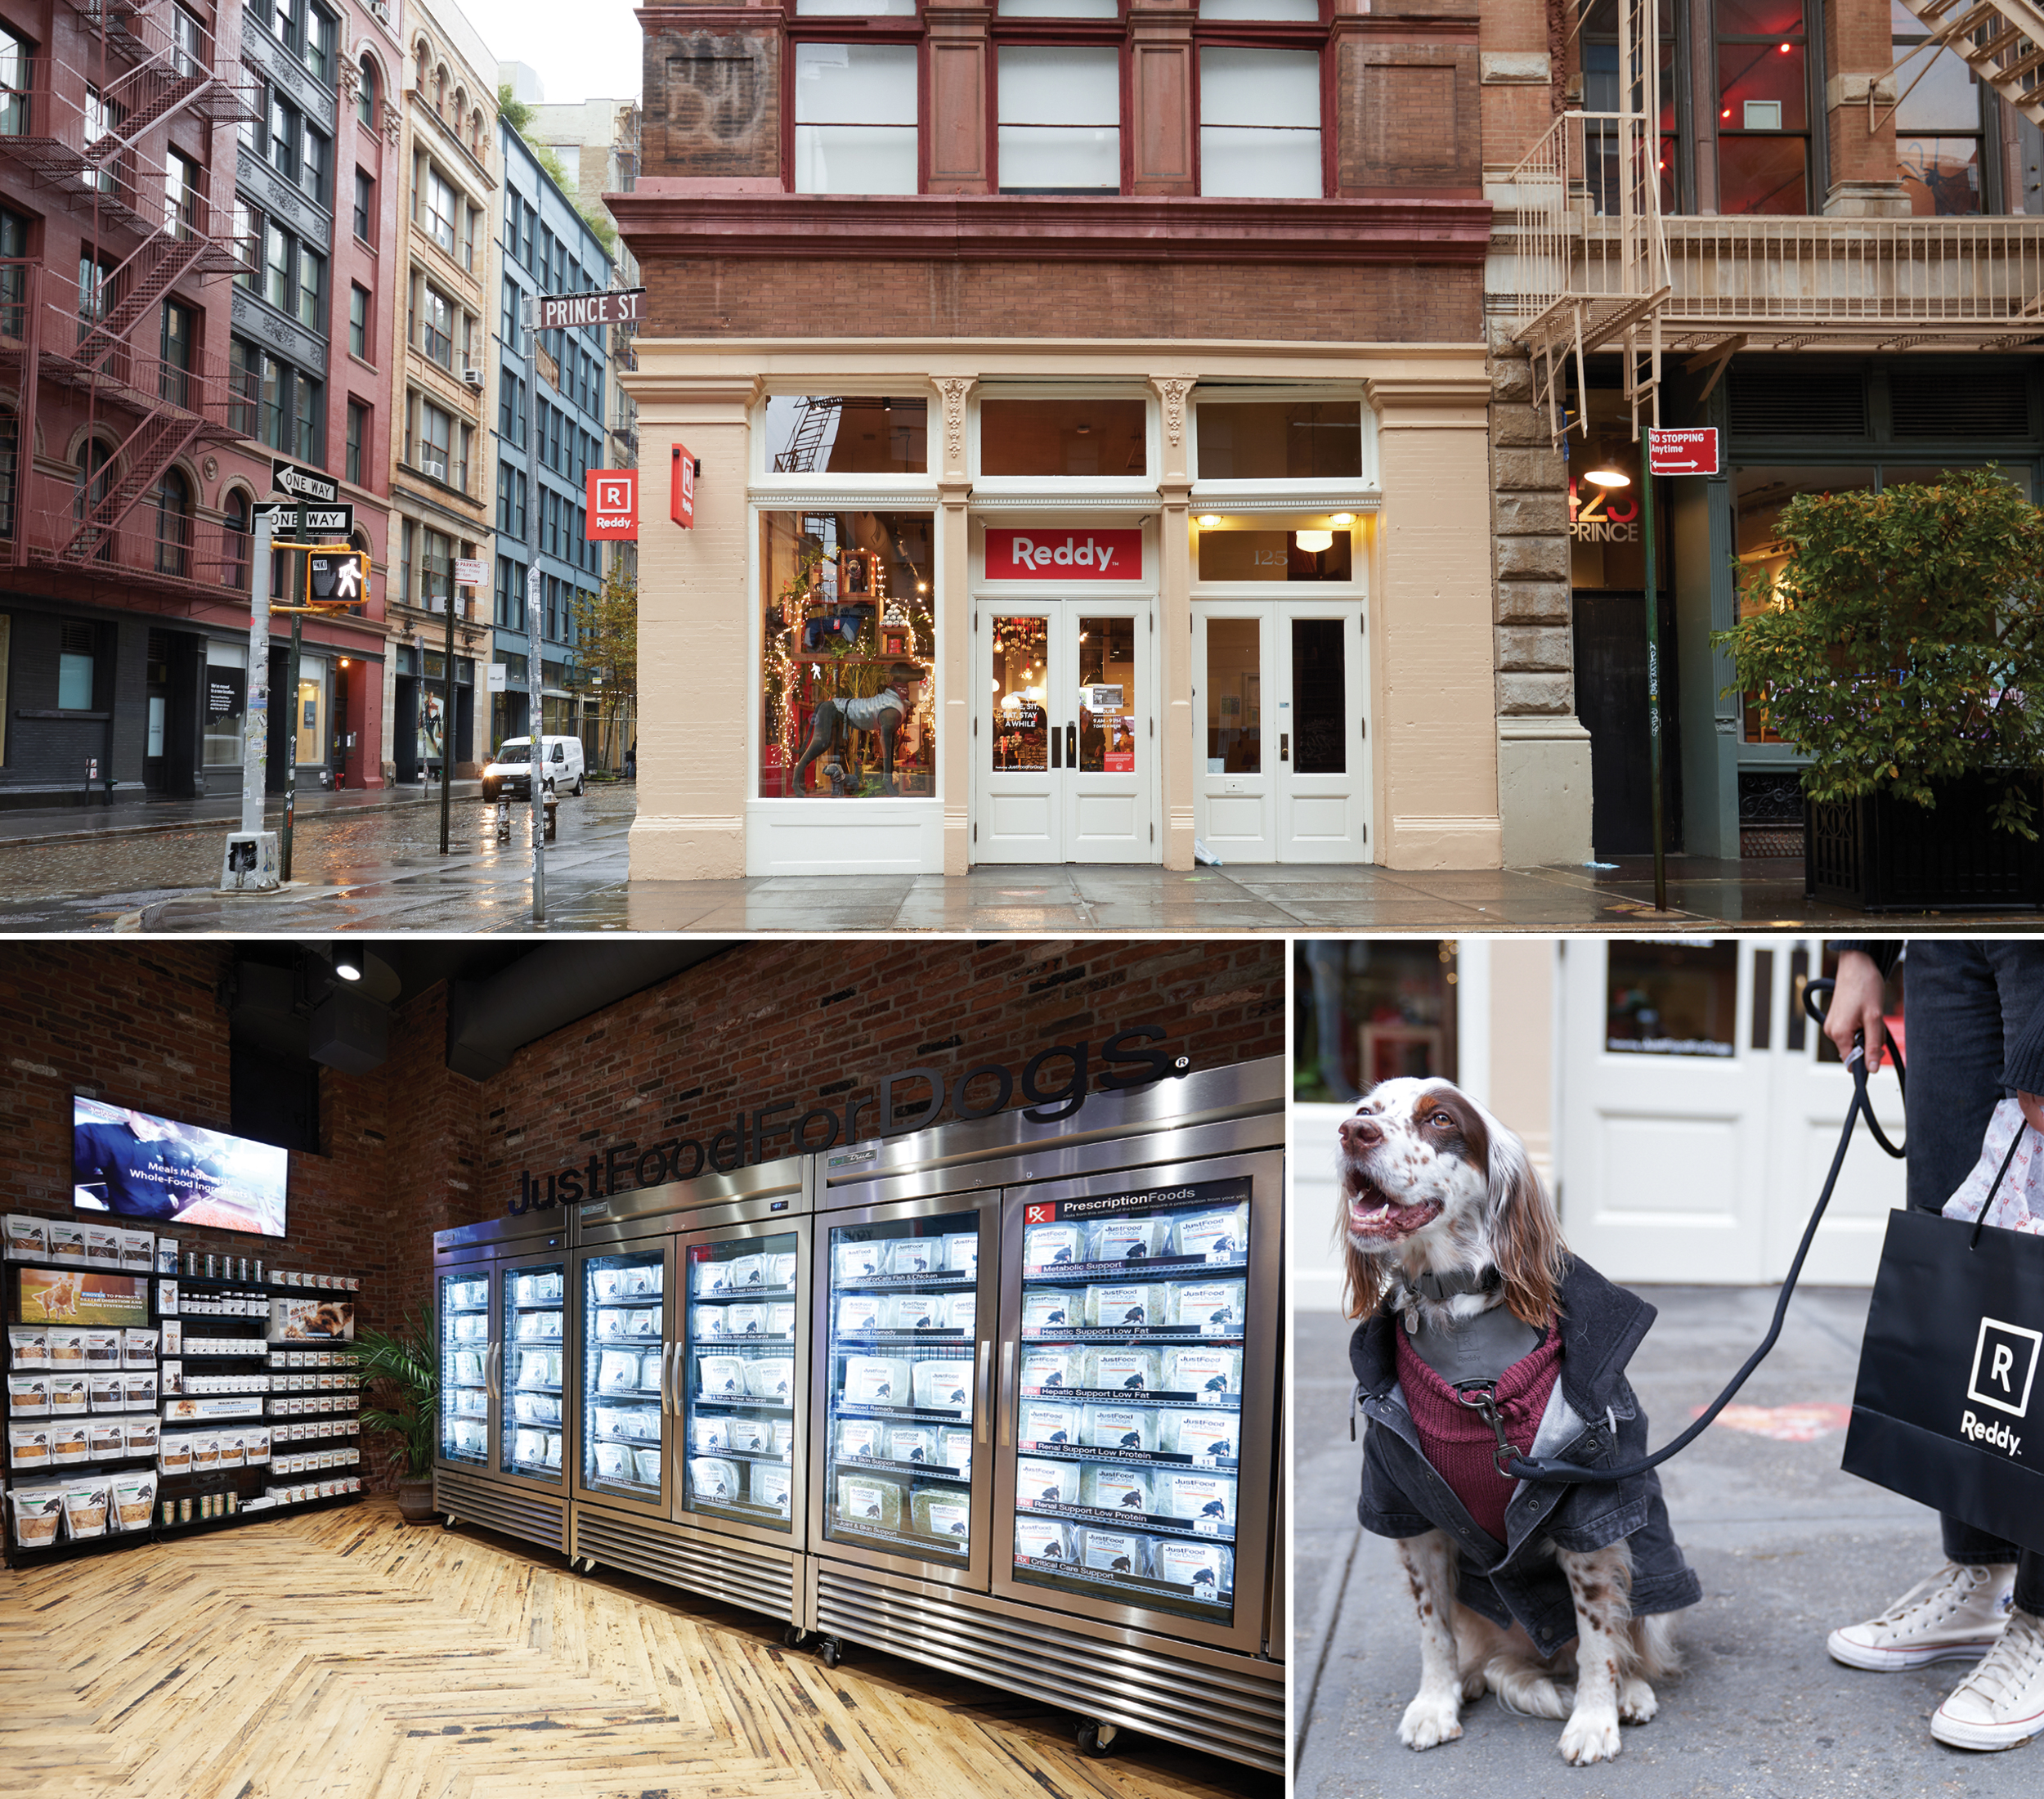 Petco’s latest Reddy concept in New York’s SoHo features apparel and other treats for dogs like collars, clothes and travel accessories.